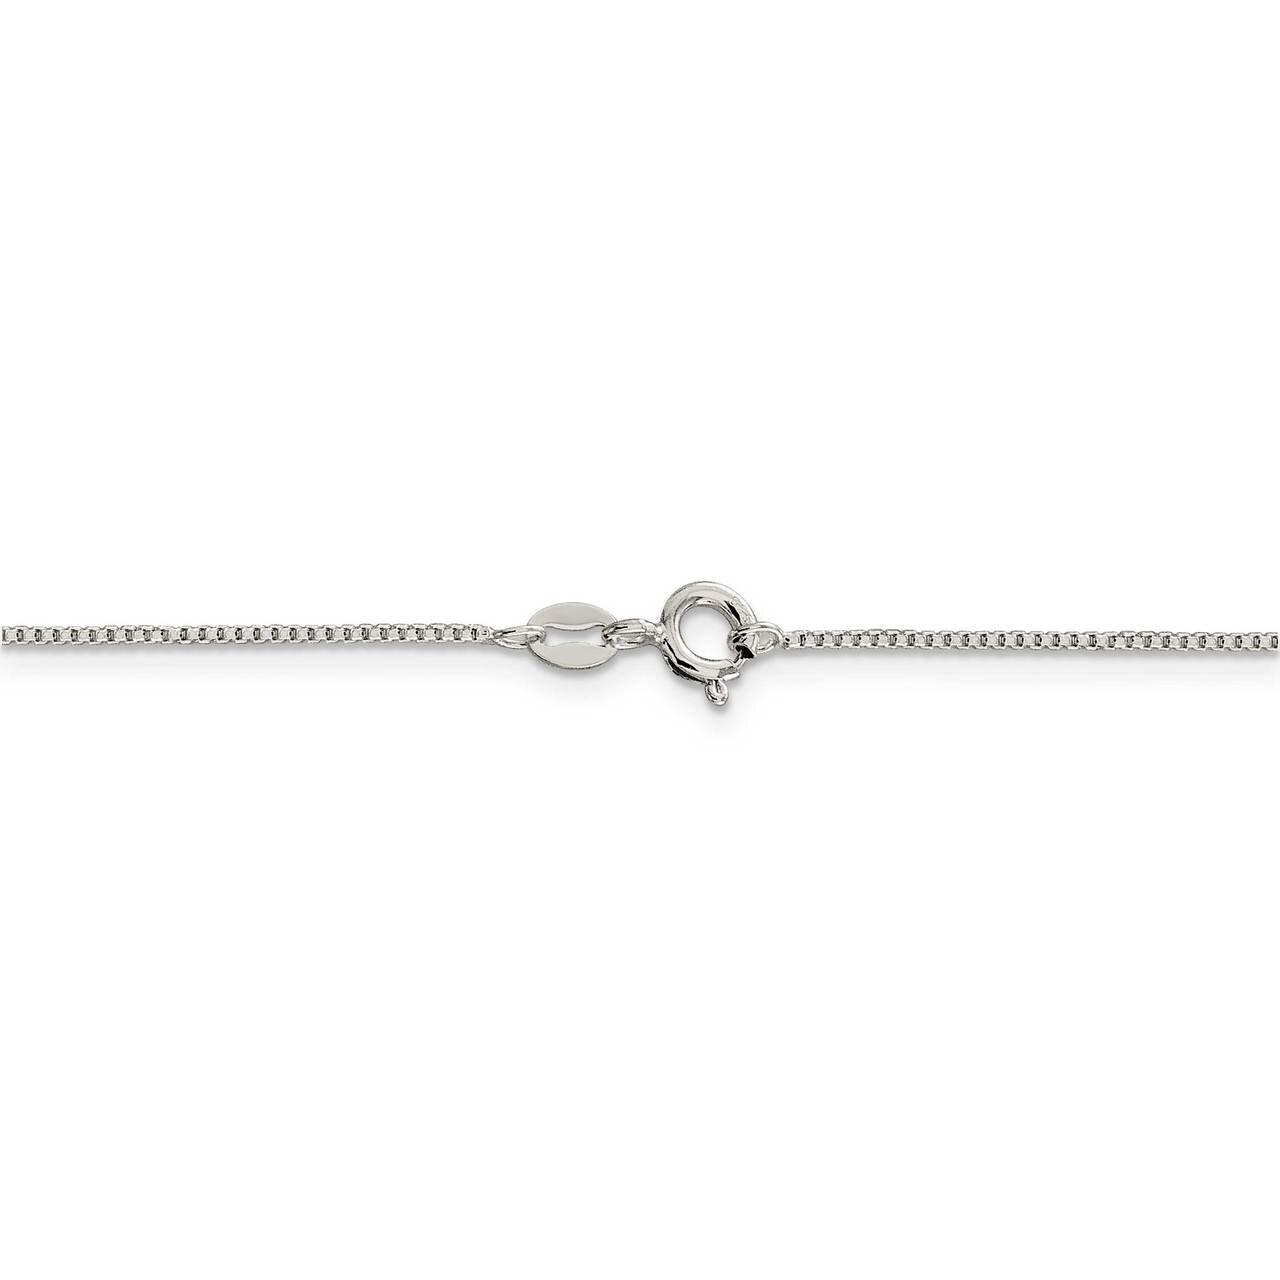 26 Inch 1mm Round Box Chain Sterling Silver QHX019-26